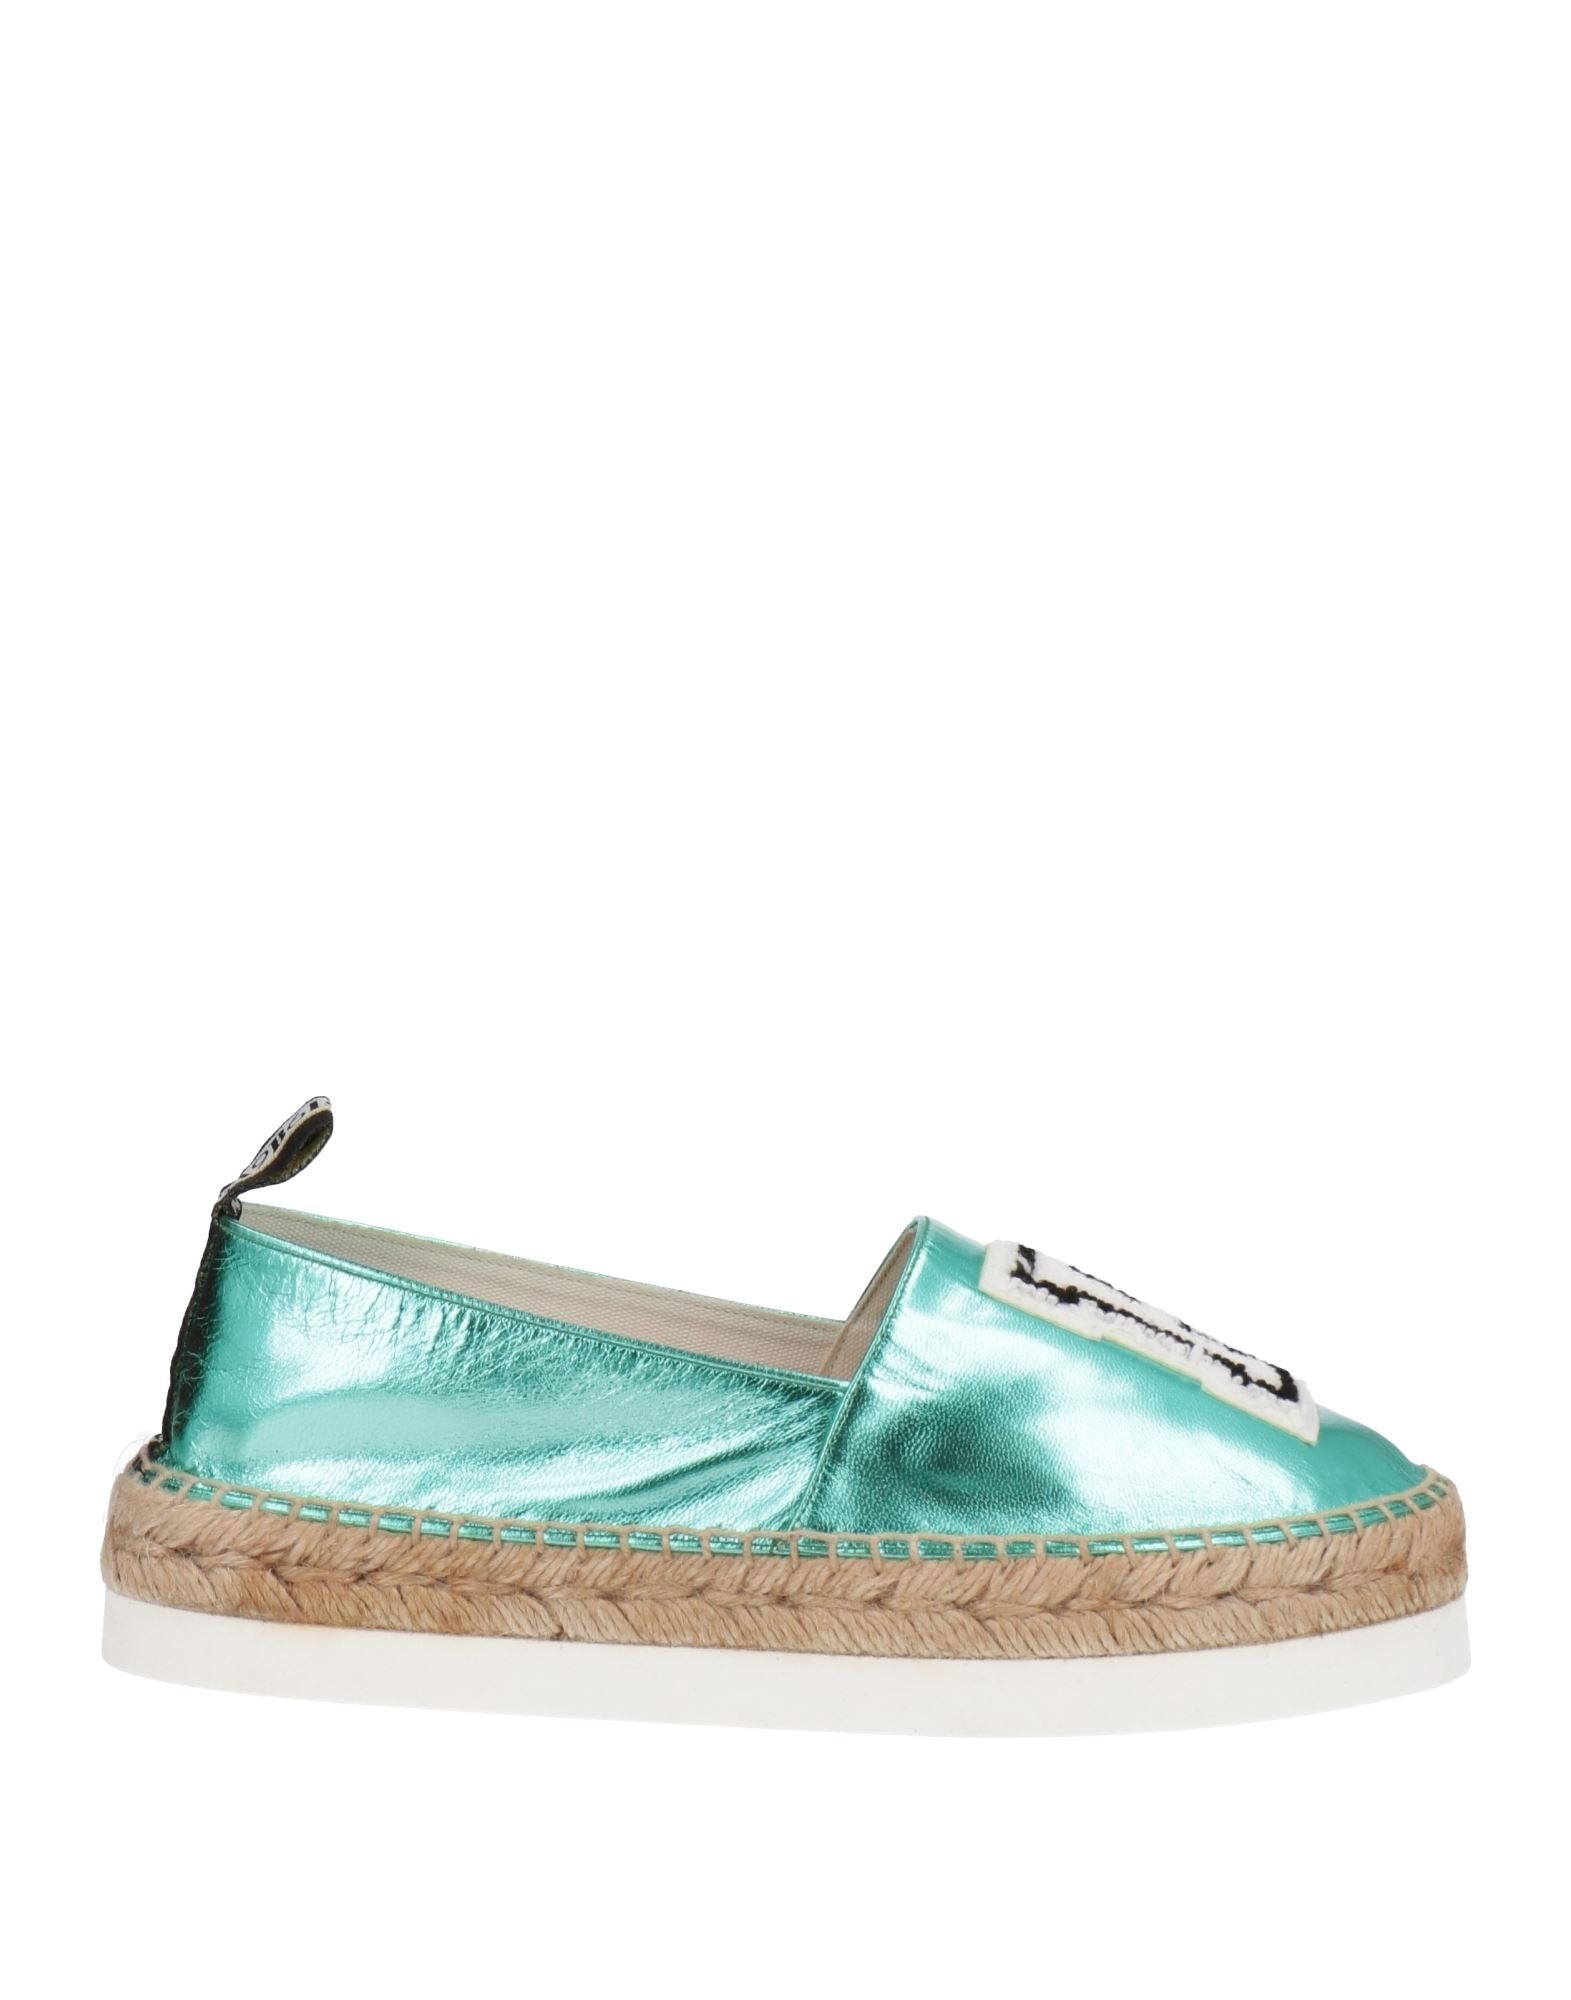 Shop Fabi Woman Espadrilles Turquoise Size 6 Soft Leather In Blue